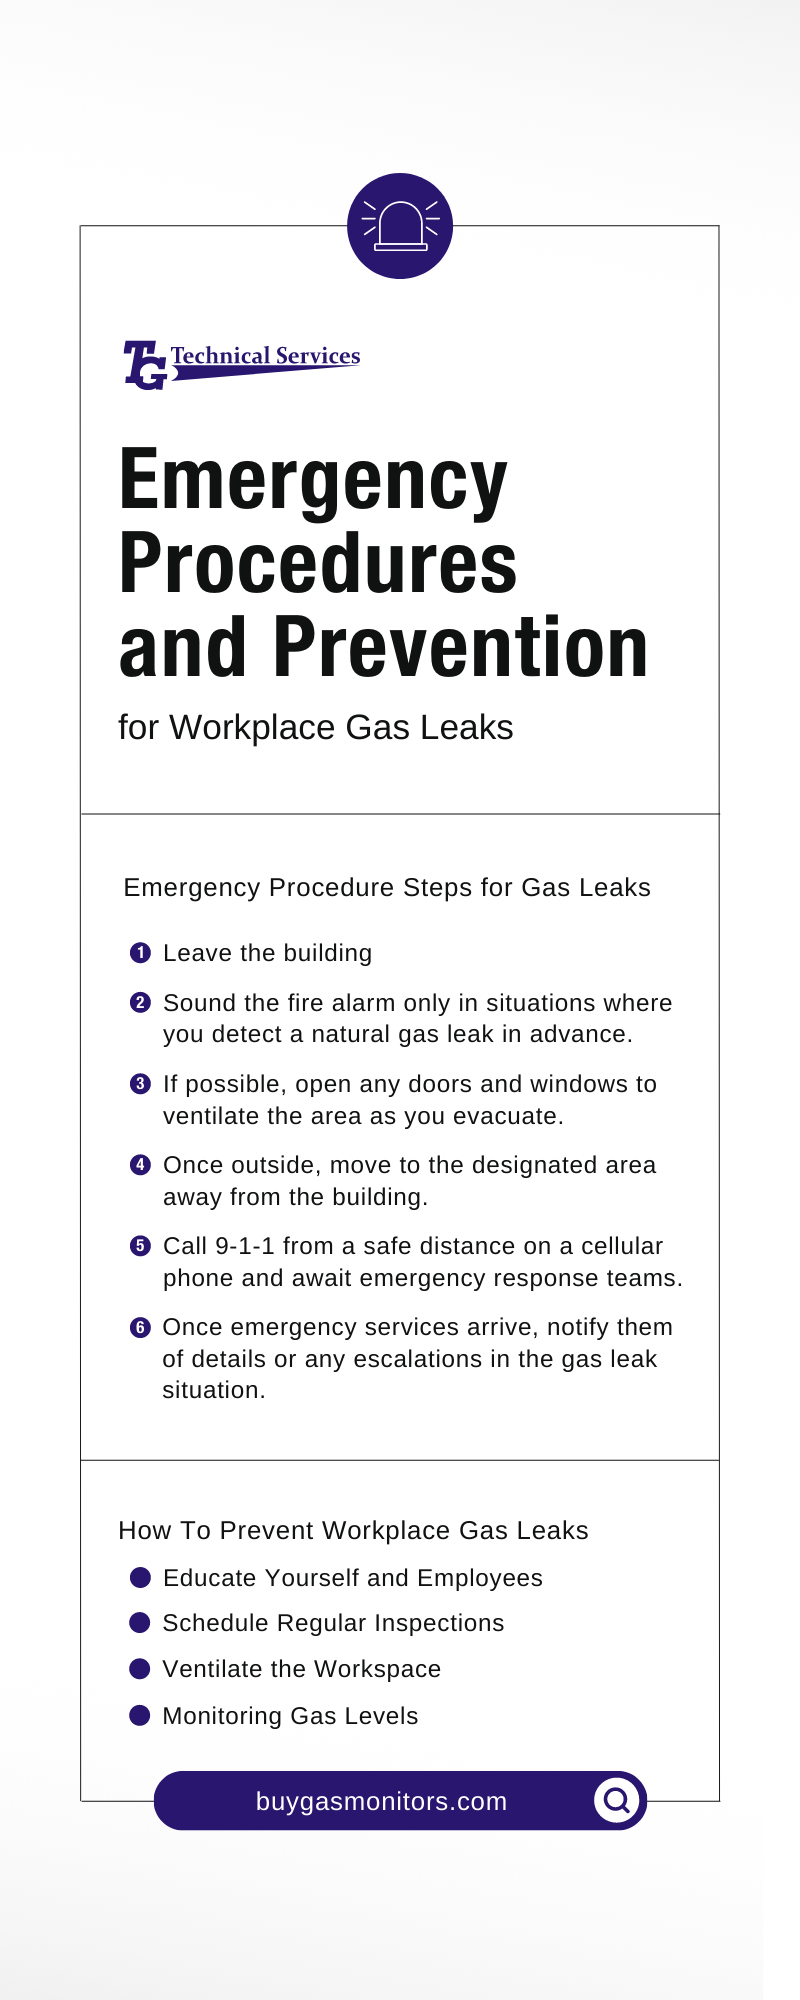 Emergency Procedures and Prevention for Workplace Gas Leaks